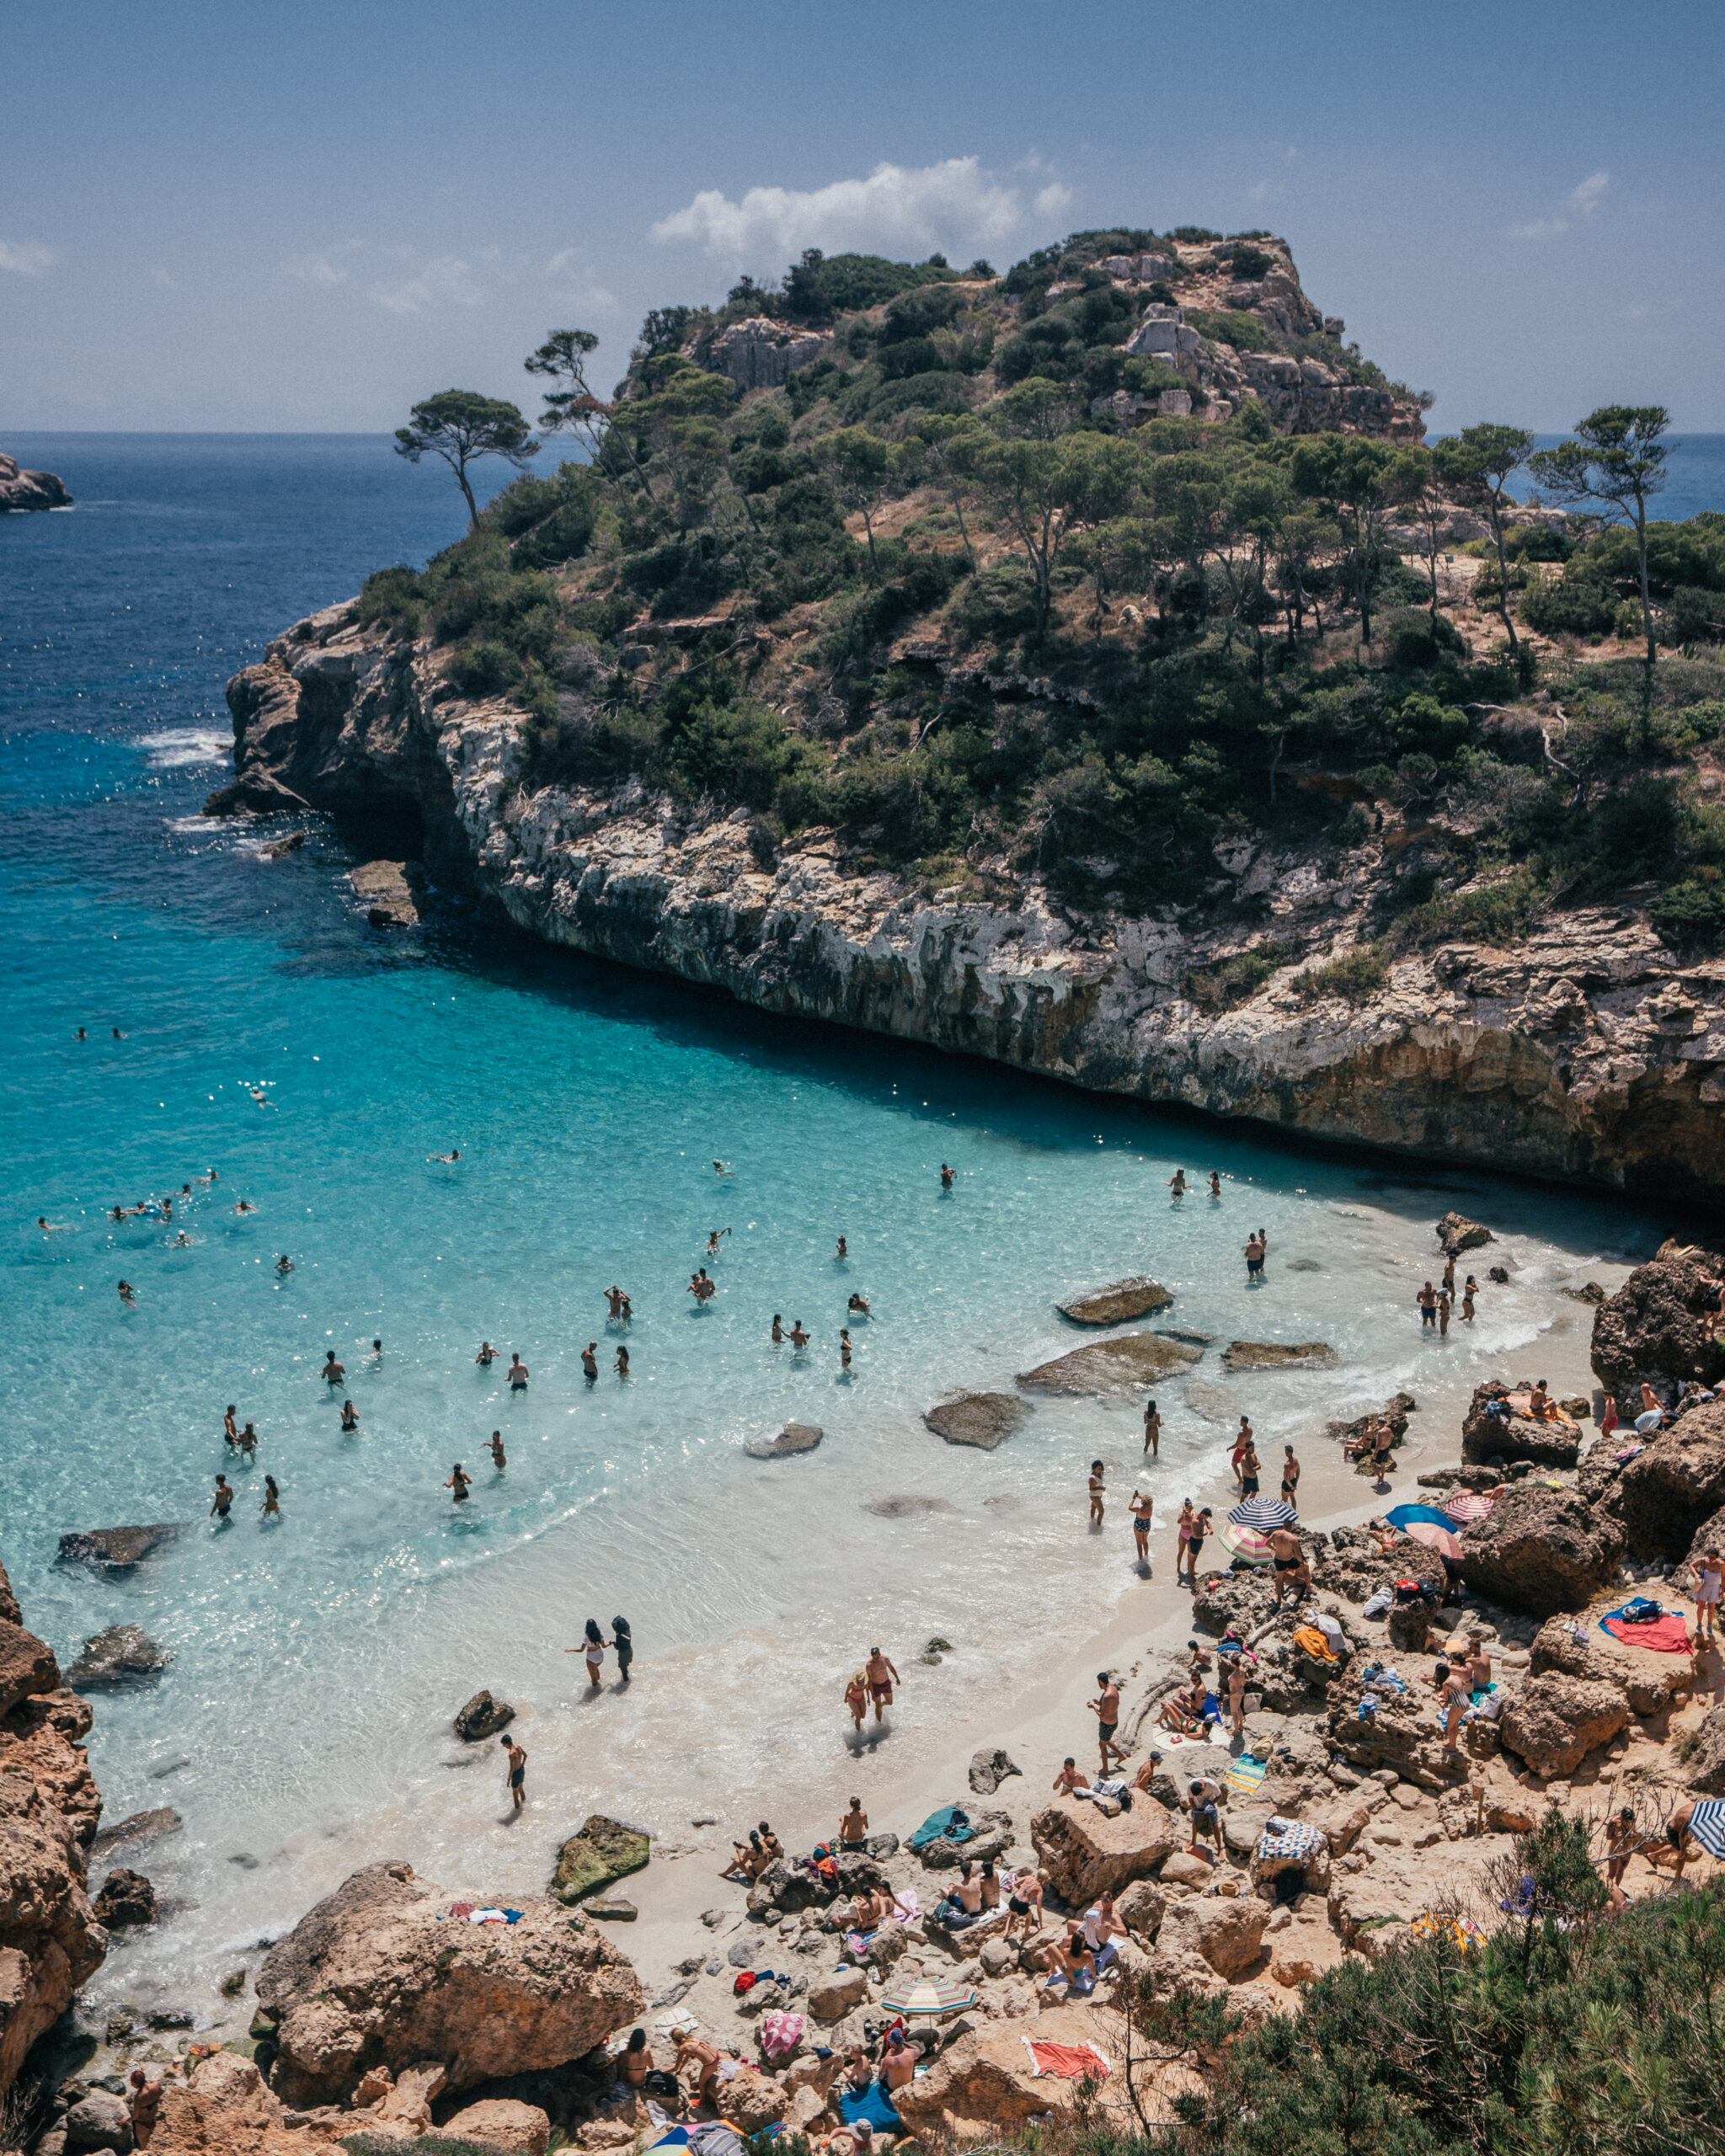 The ultimate guide to the island of Mallorca, in Spain including the best beaches, viewpoints, photo locations, hotels, restaurants and more.